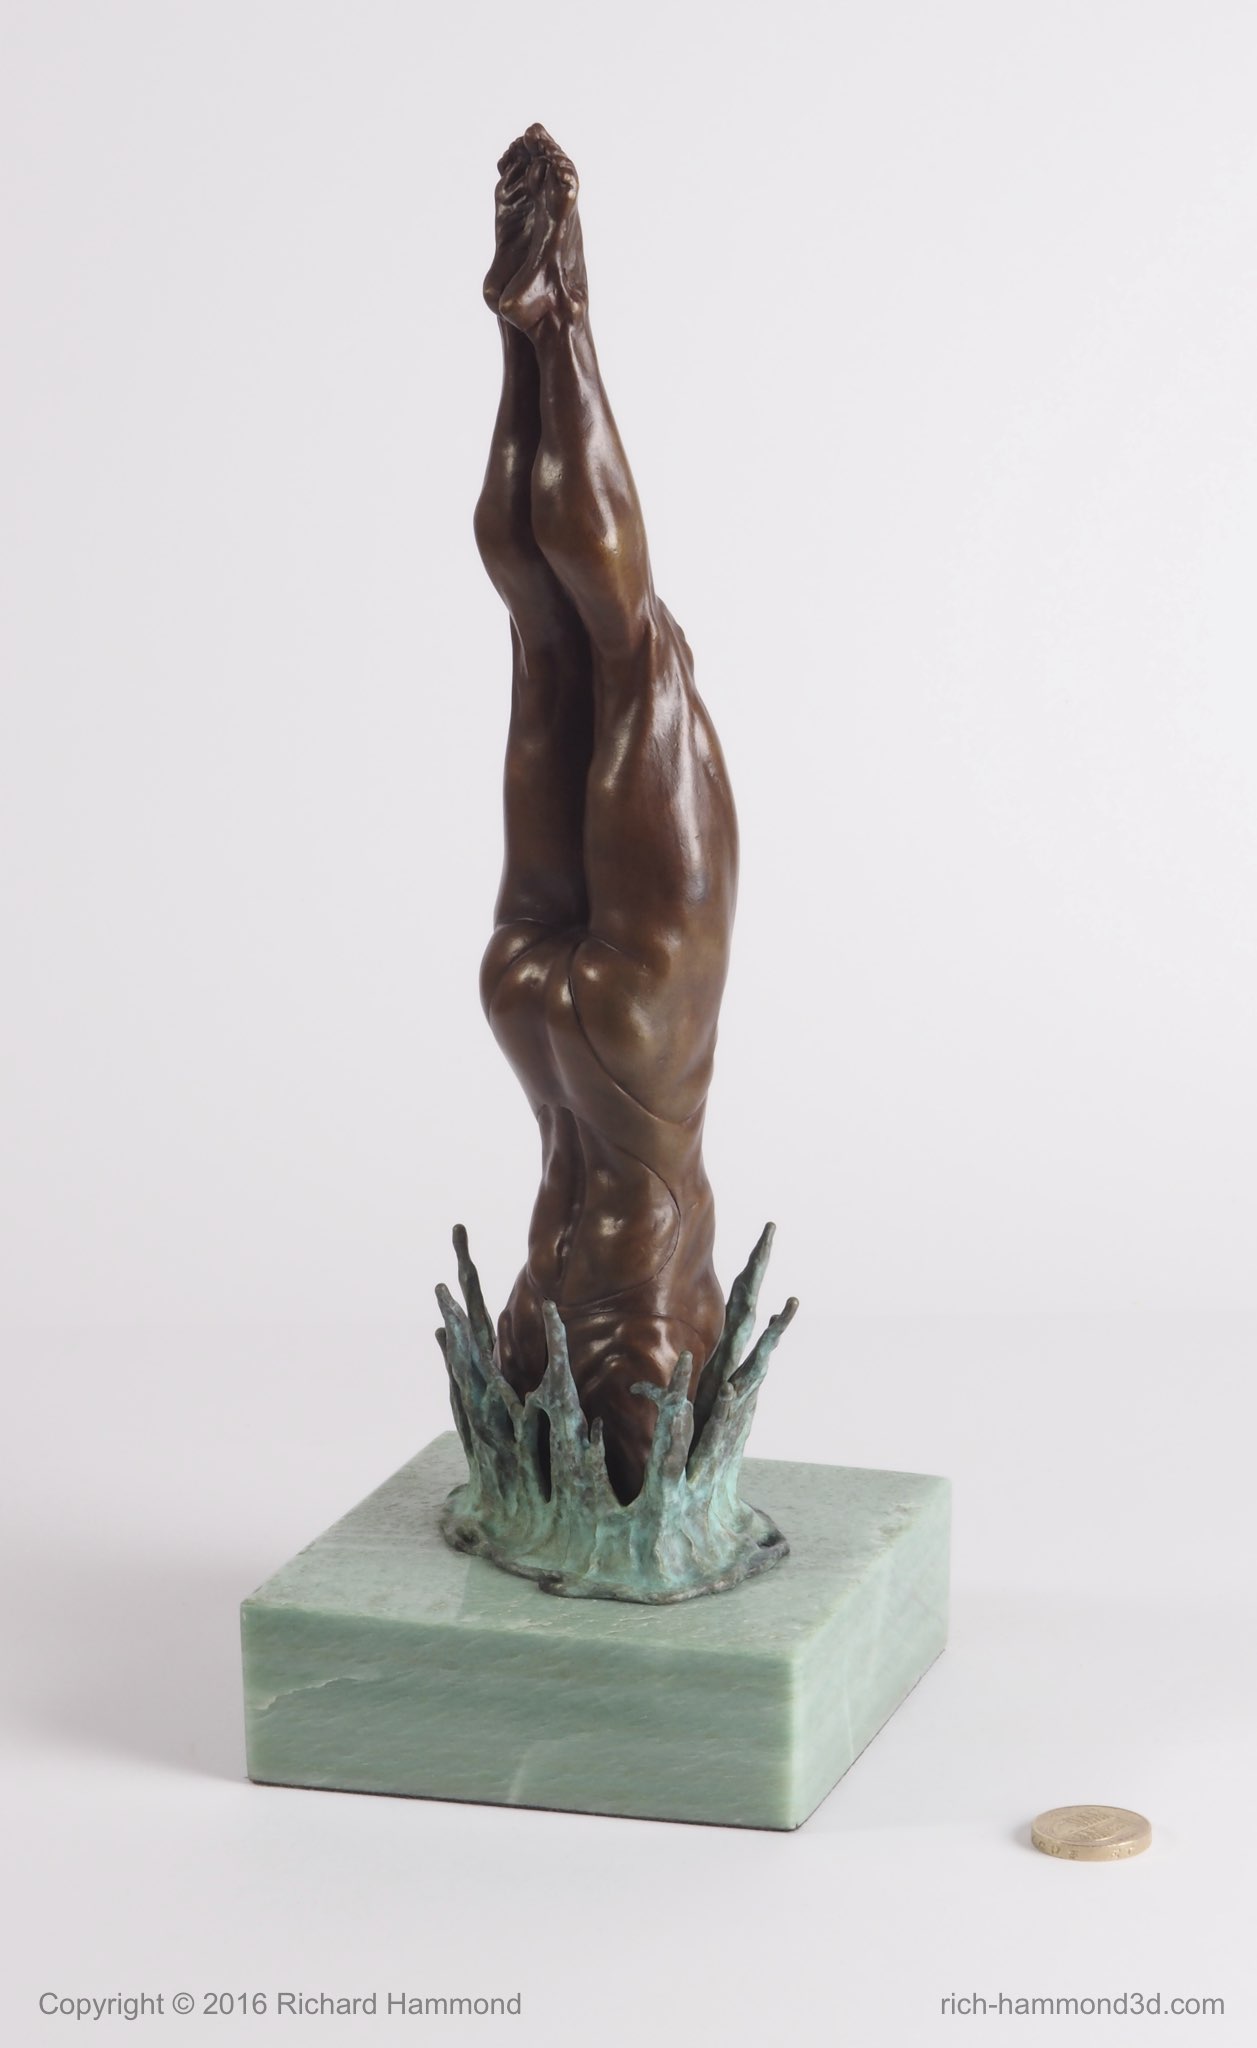 My execution was influenced by 'The Bathers' by Camille Claudel. I admired her combination of green stone with bronze.